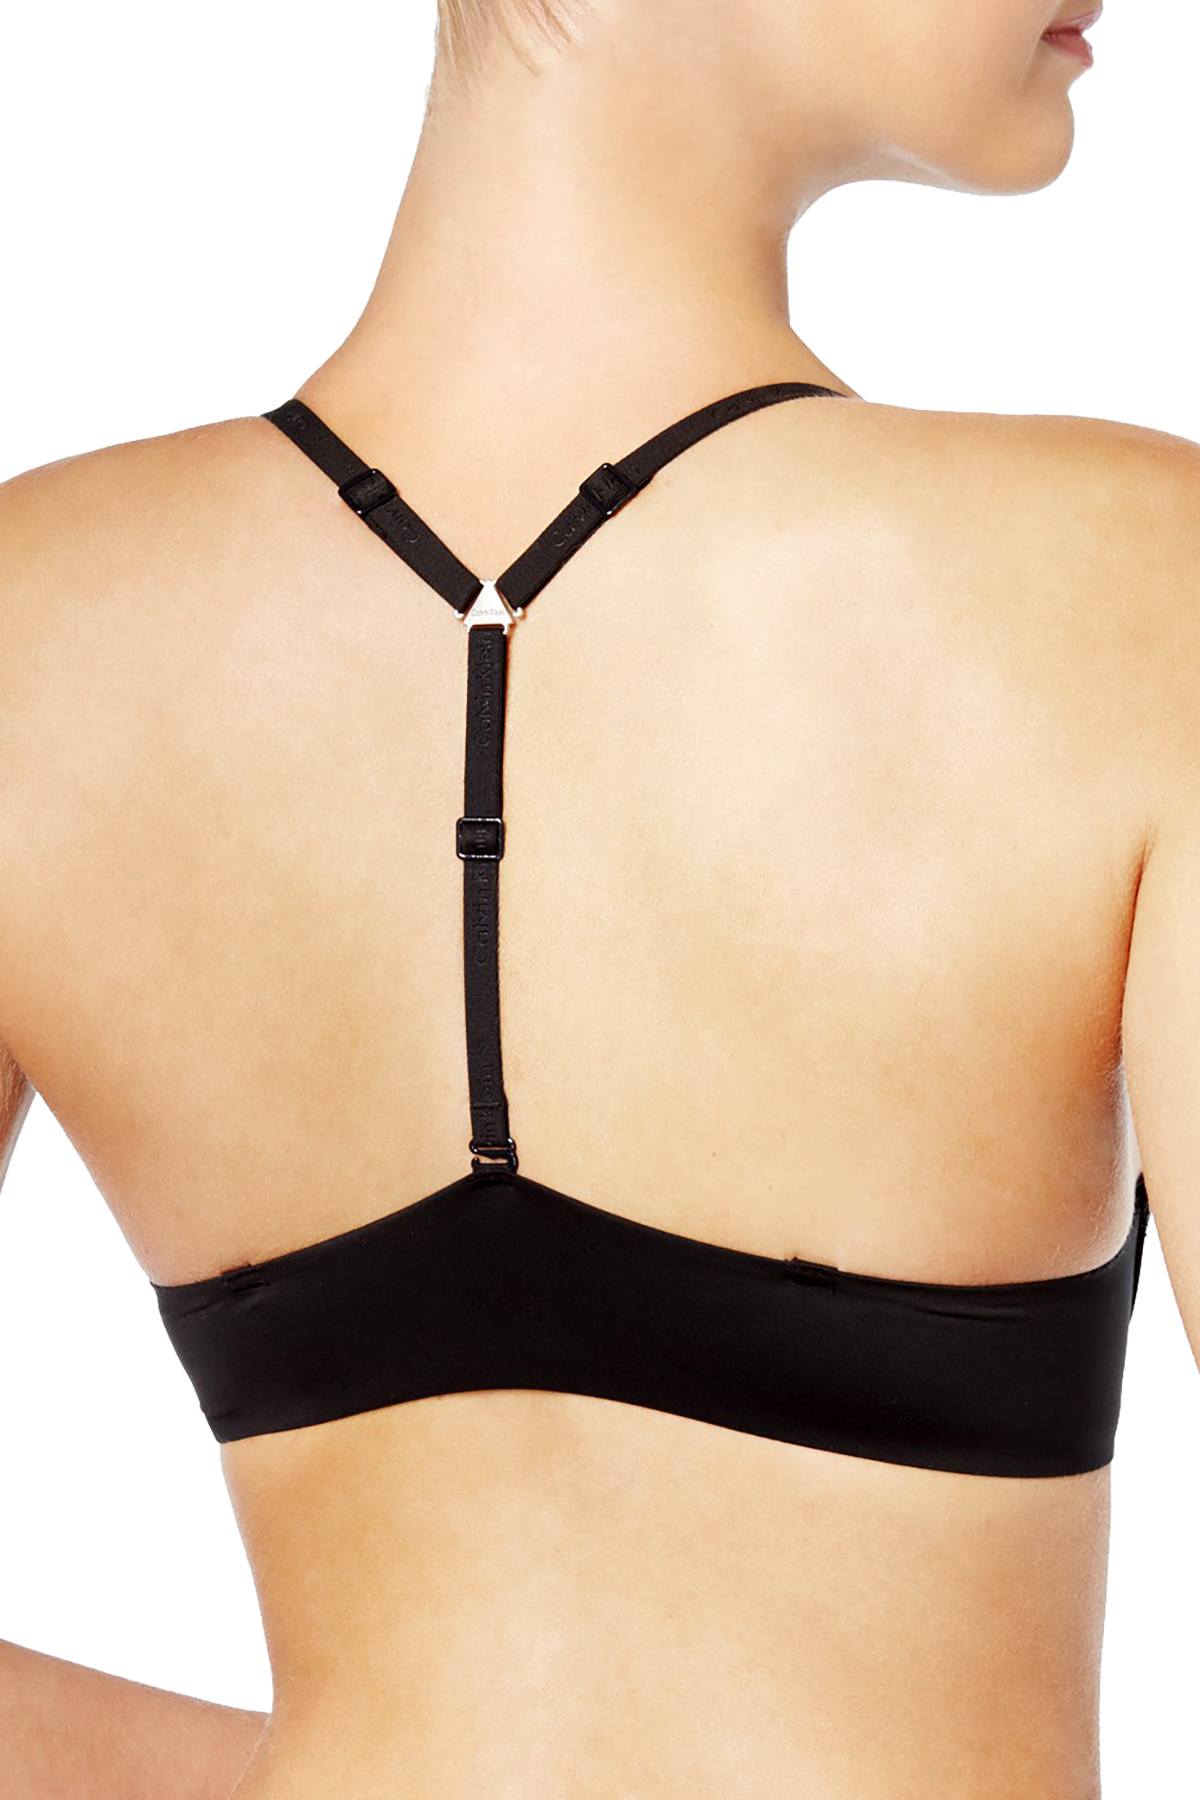 Calvin klein Perfectly Fit Push-Up Bra Black